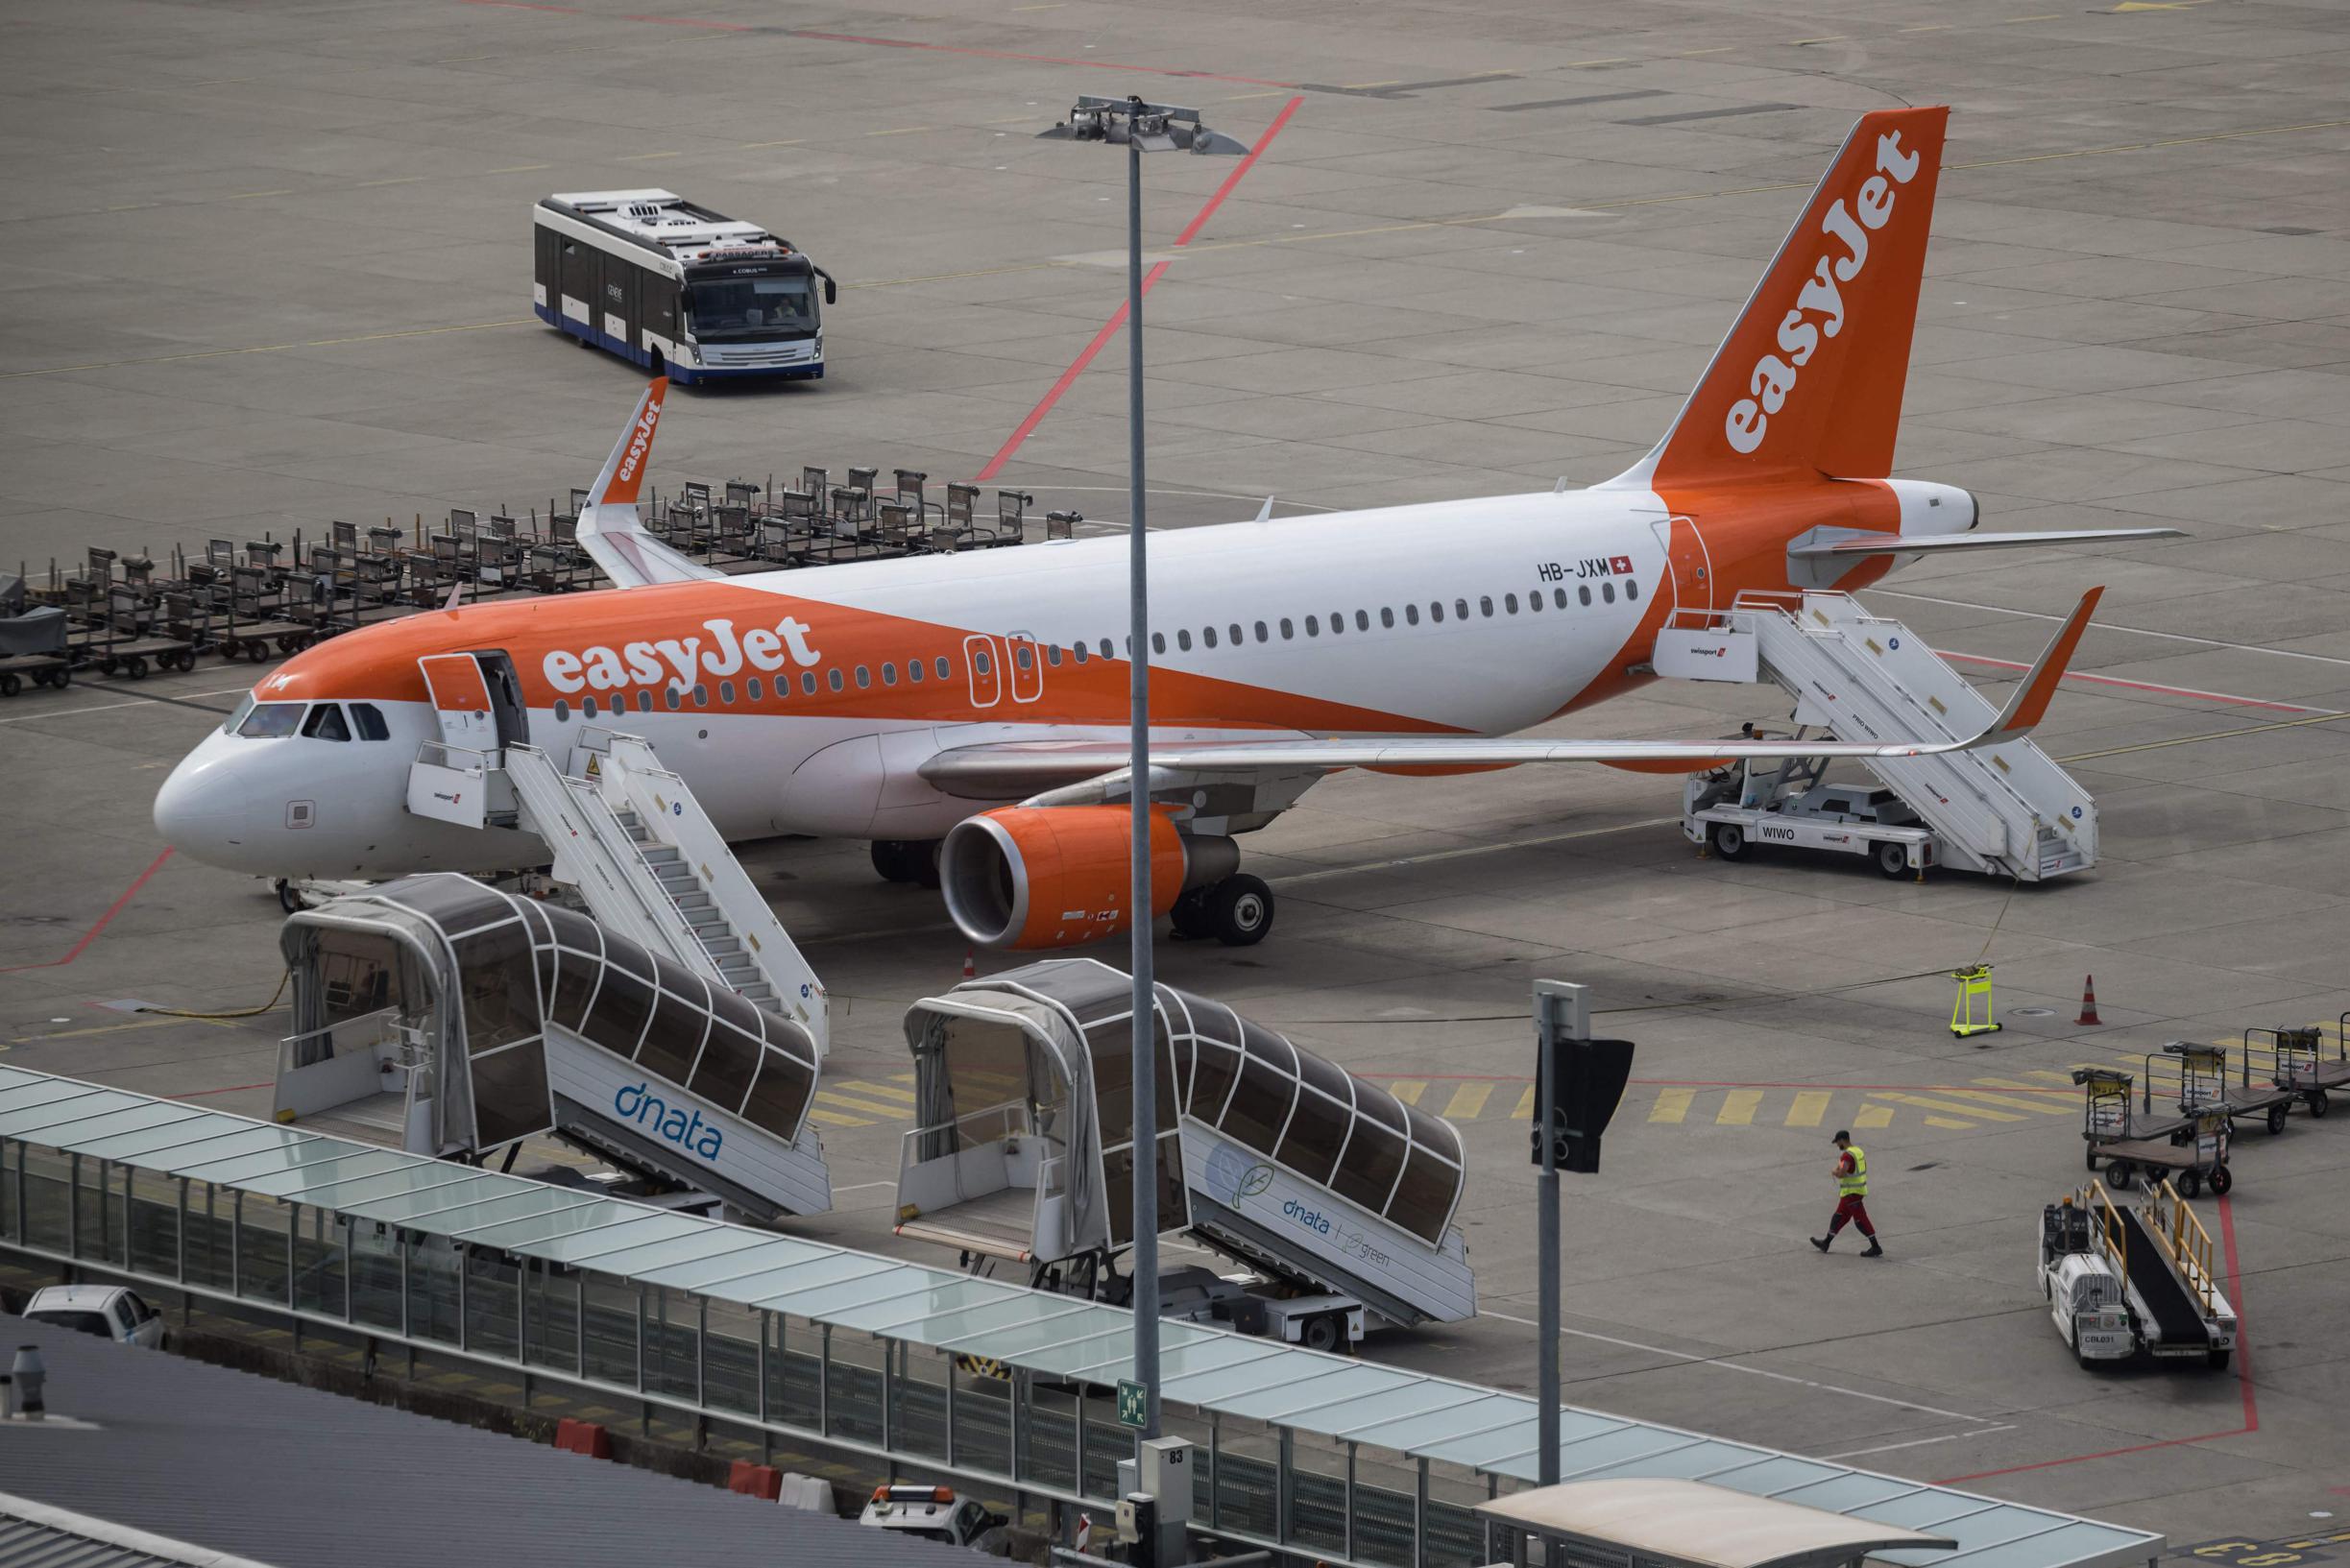 Flying staff at Easyjet in Spain receive 22 percent more pay and end strike